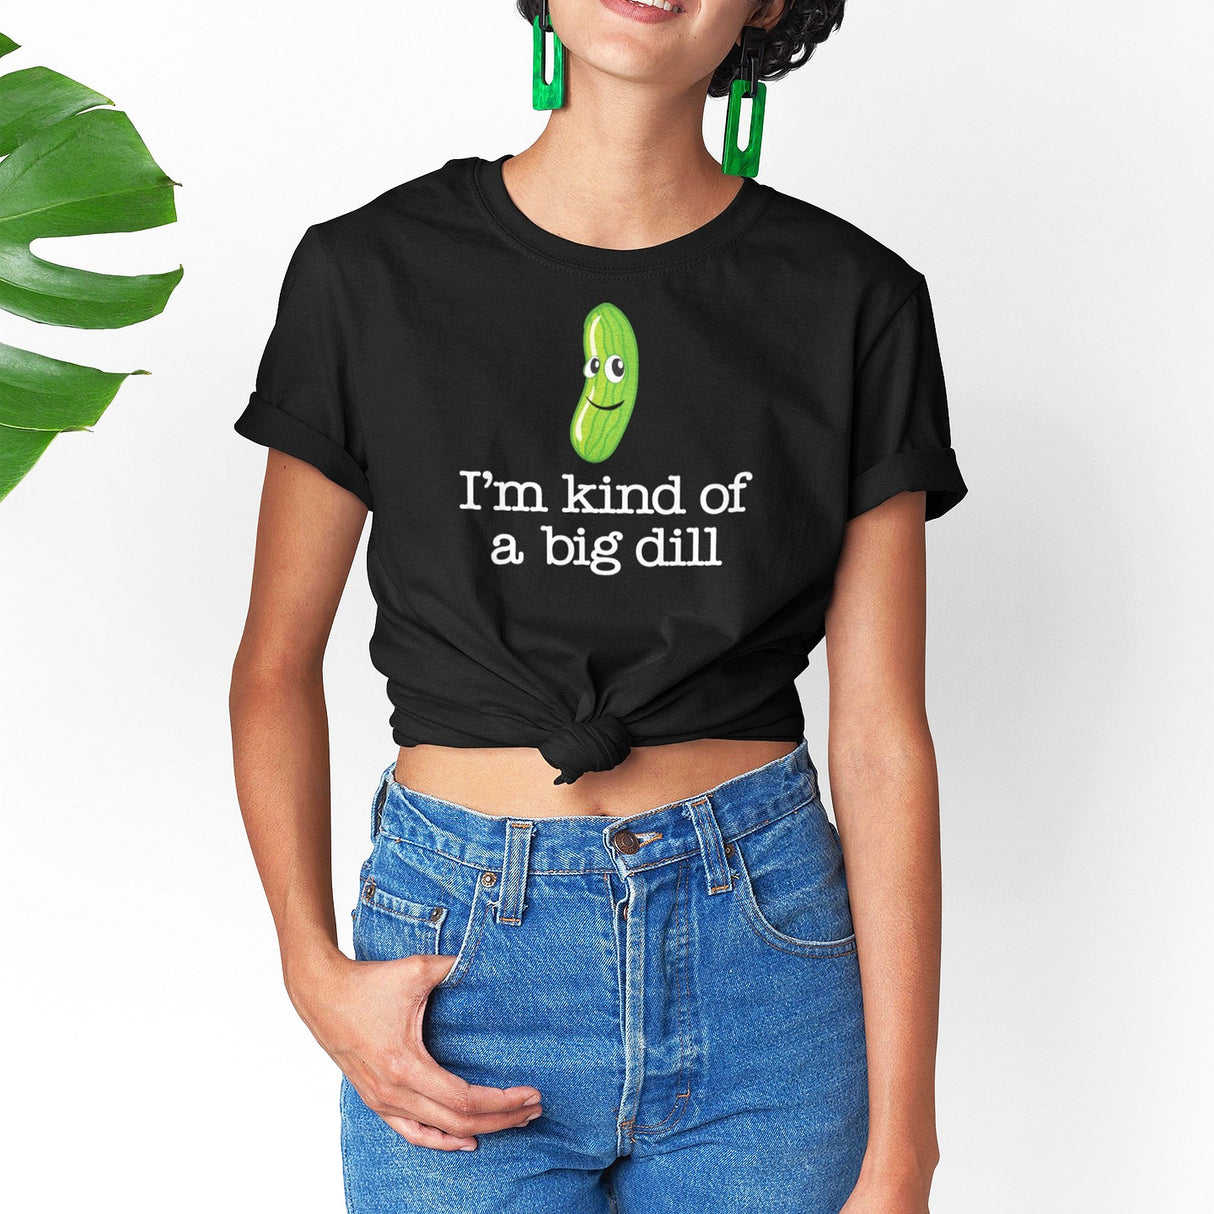 im-kind-of-a-big-dill-food-tee-life-t-shirt-punny-tee-clever-t-shirt-humorous-tee#color_black